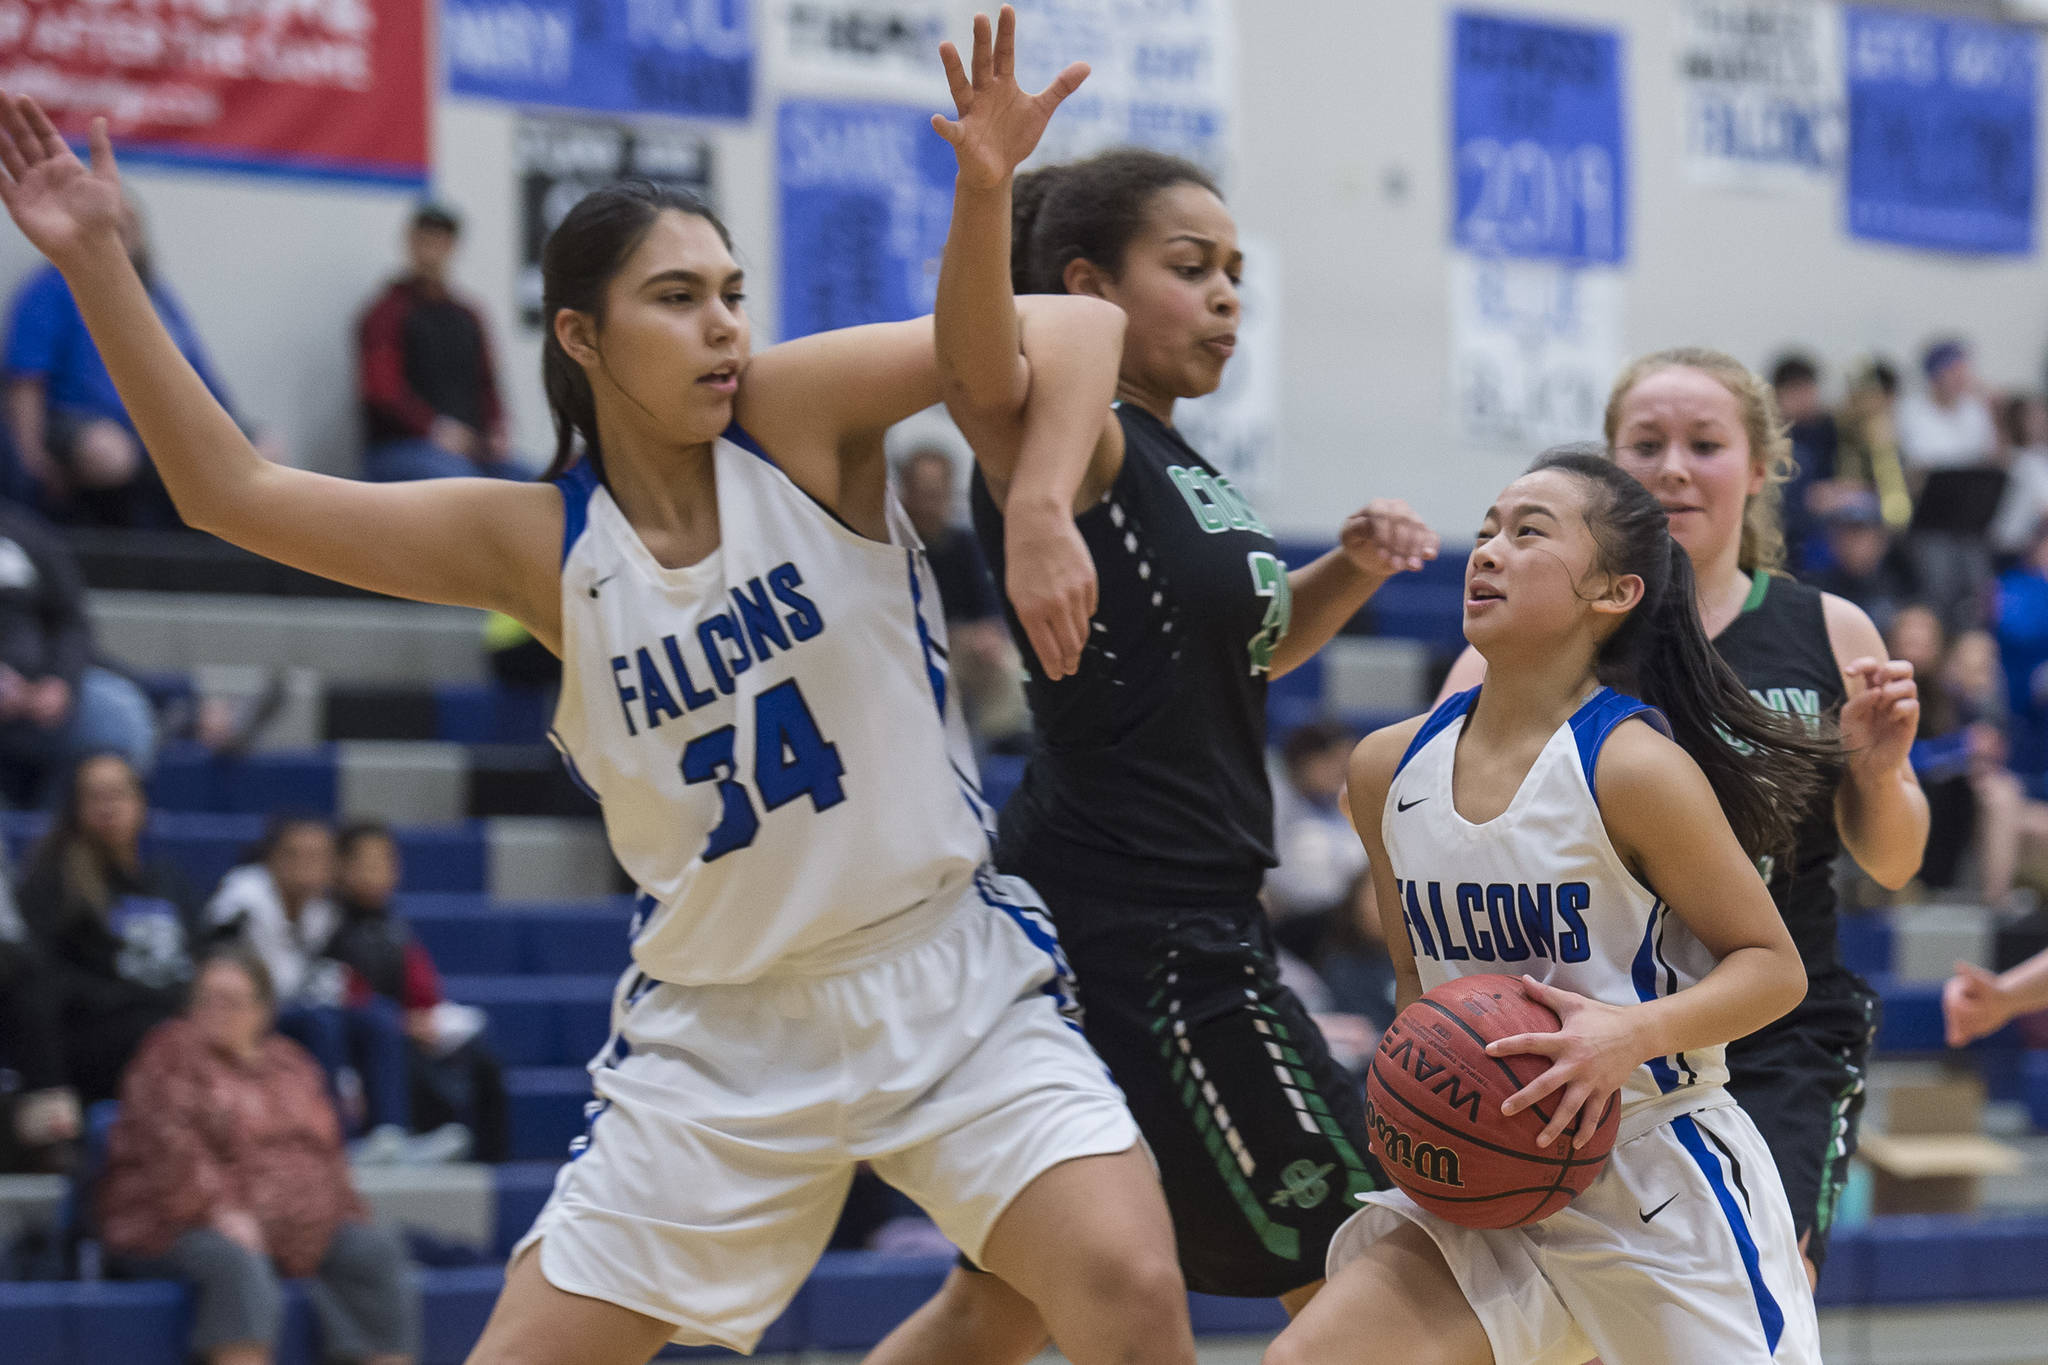 Thunder Mountain’s Mary Khaye Garcia, right, takes advantage of a pick against Colony’s Kali Bull by teammate Kira Frommherz at TMHS on Friday, Jan. 11, 2019. Colony won 58-28. (Michael Penn | Juneau Empire)